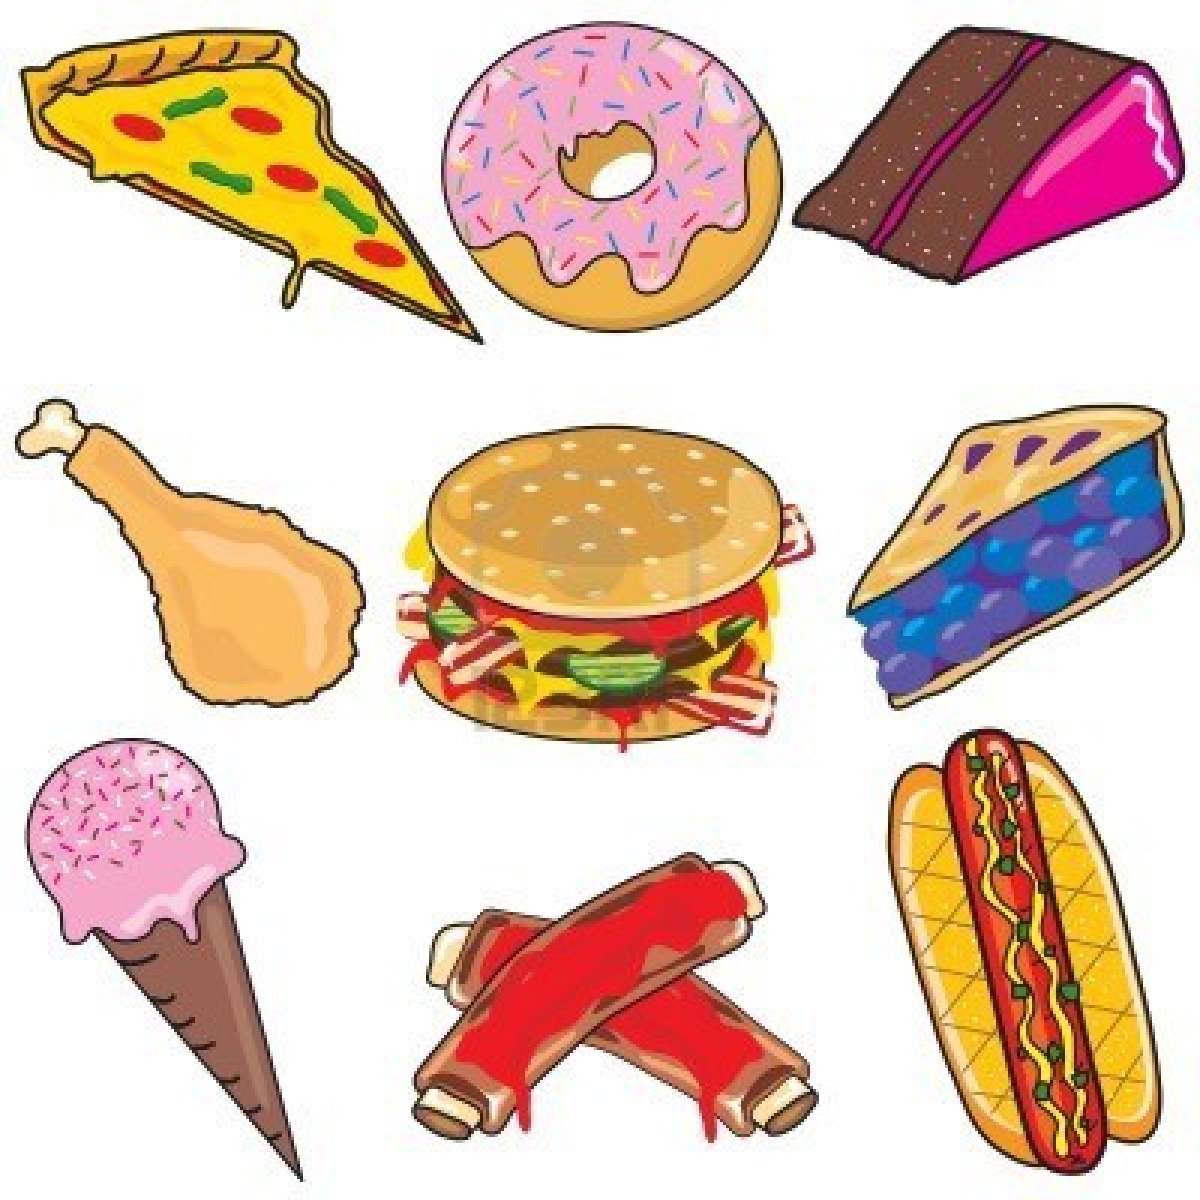 healthy food clipart